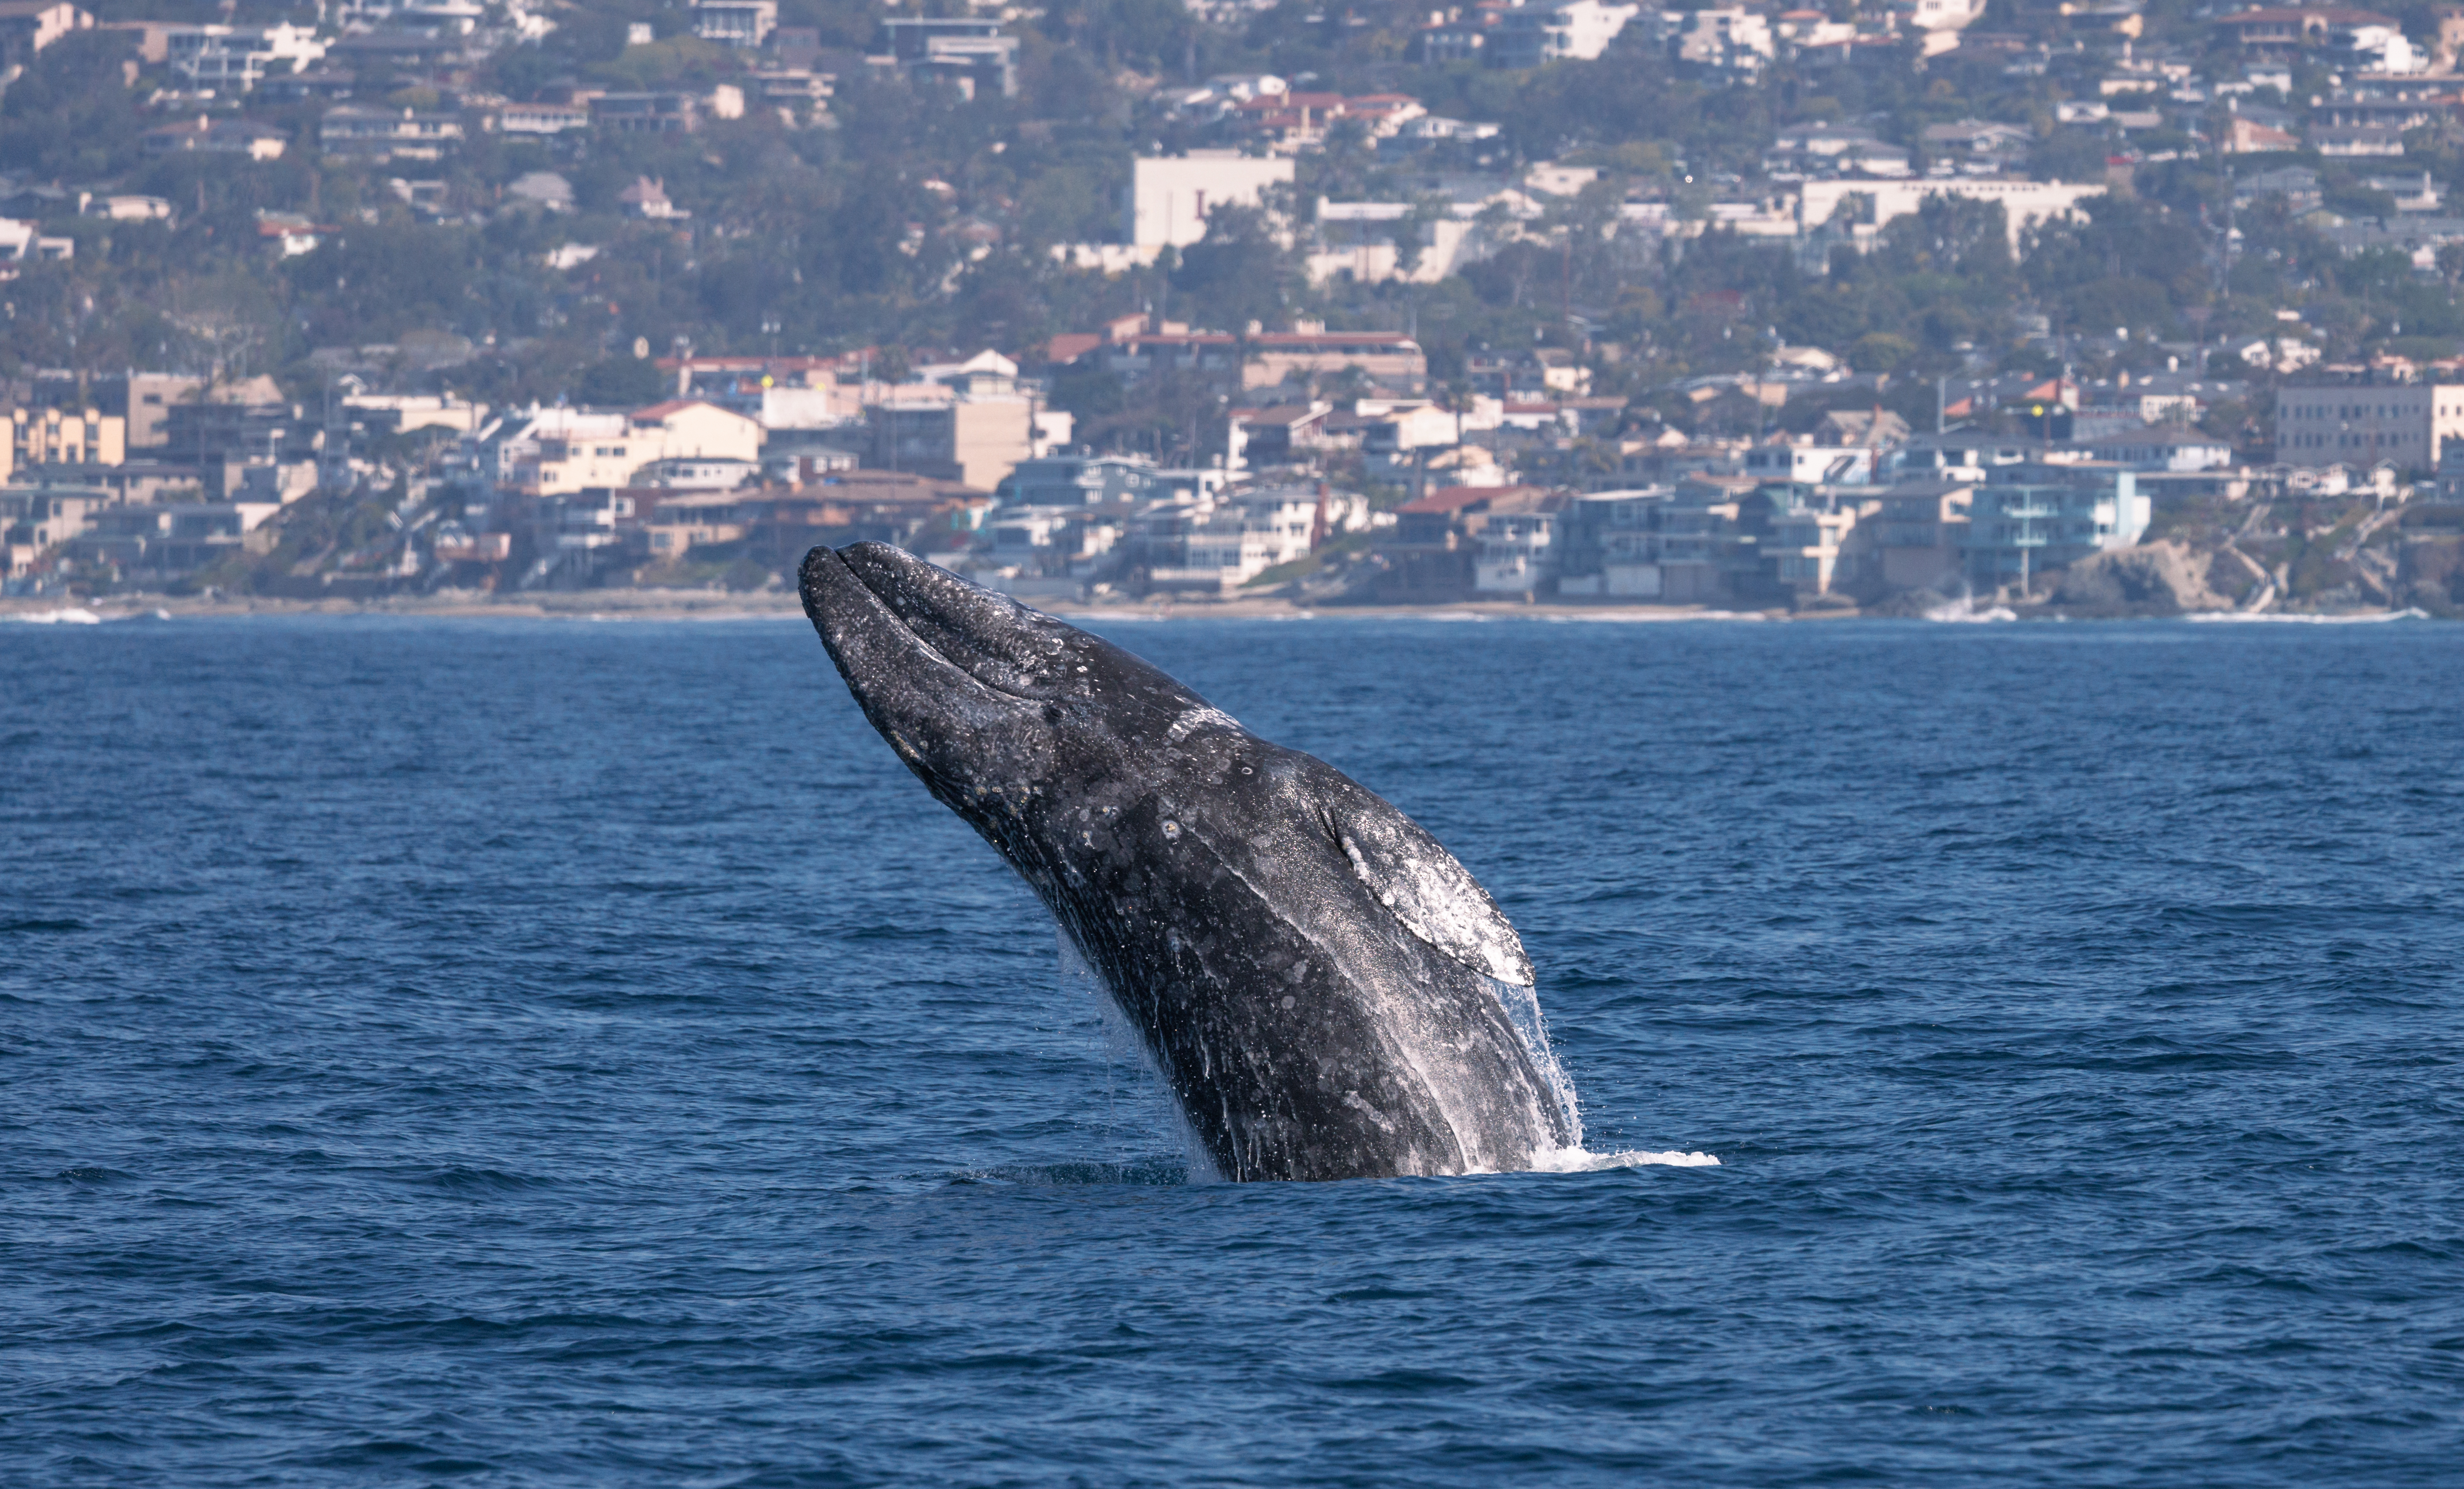 Gray Whales Have One of the Longest Migrations.